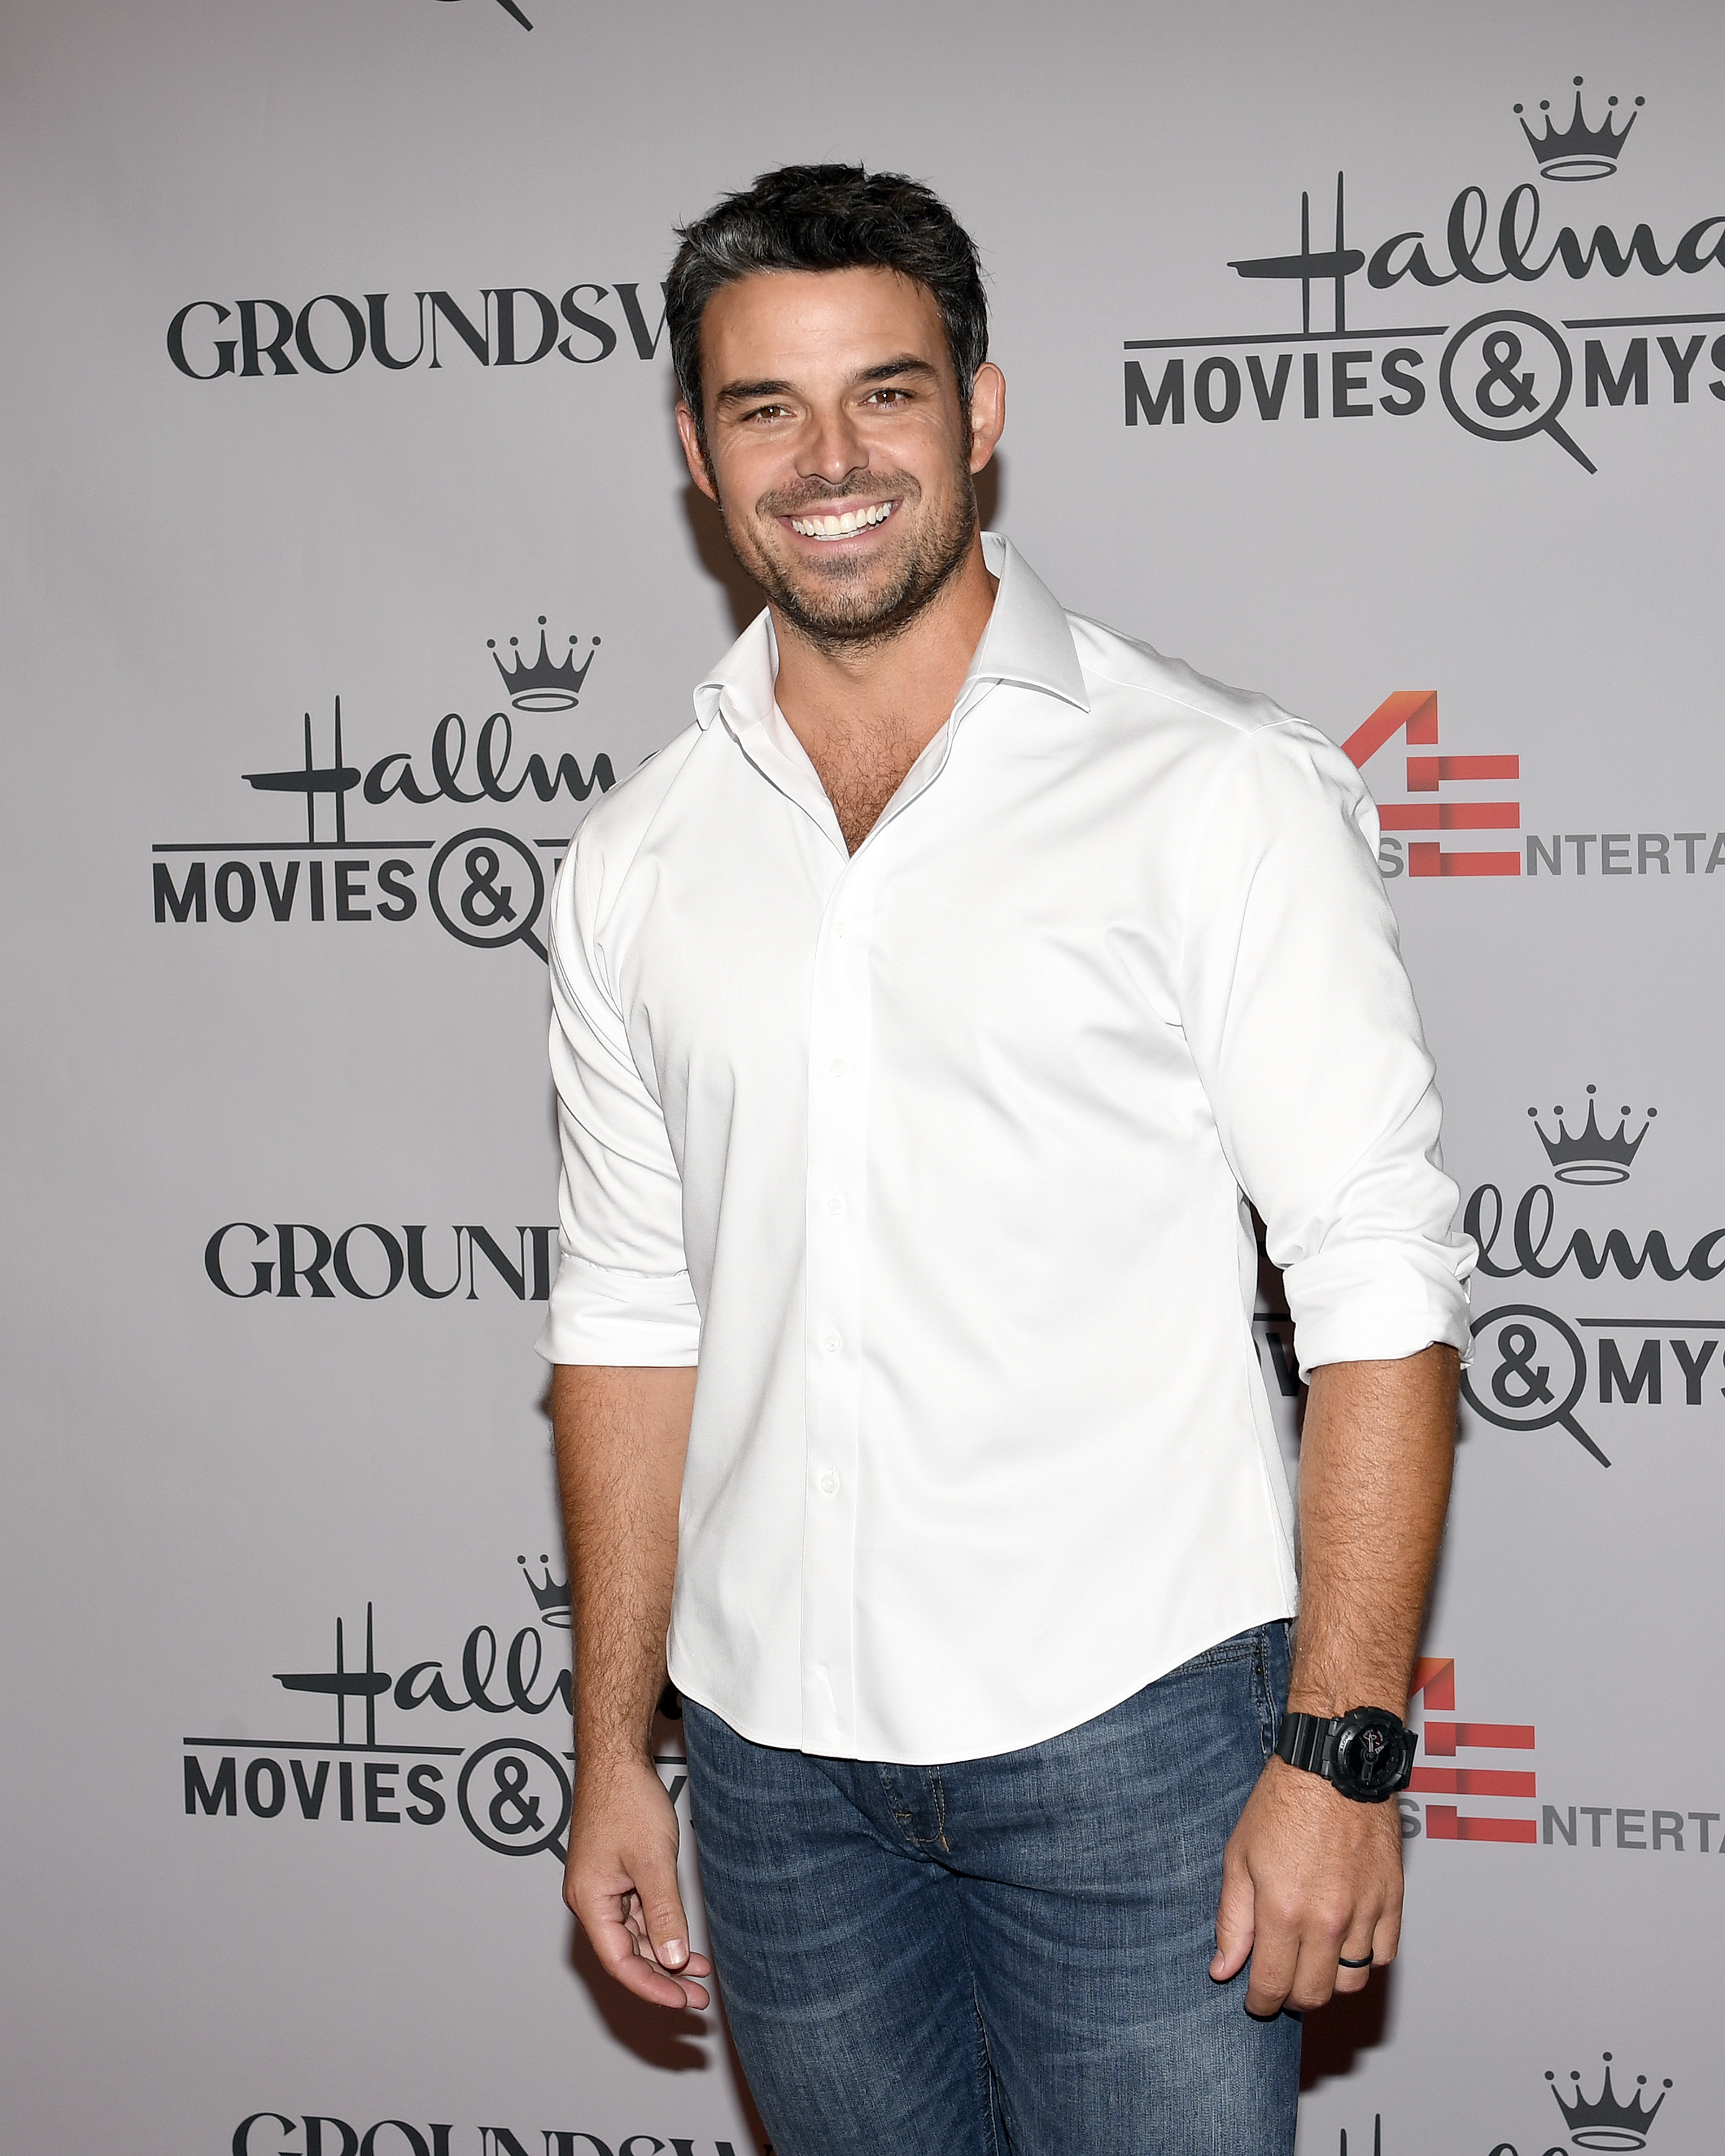 Jesse Hutch attends the special screening of the movie "Groundswell" at the Pasadena Convention Center on August 5, 2022, in Pasadena, California. | Source: Getty Images